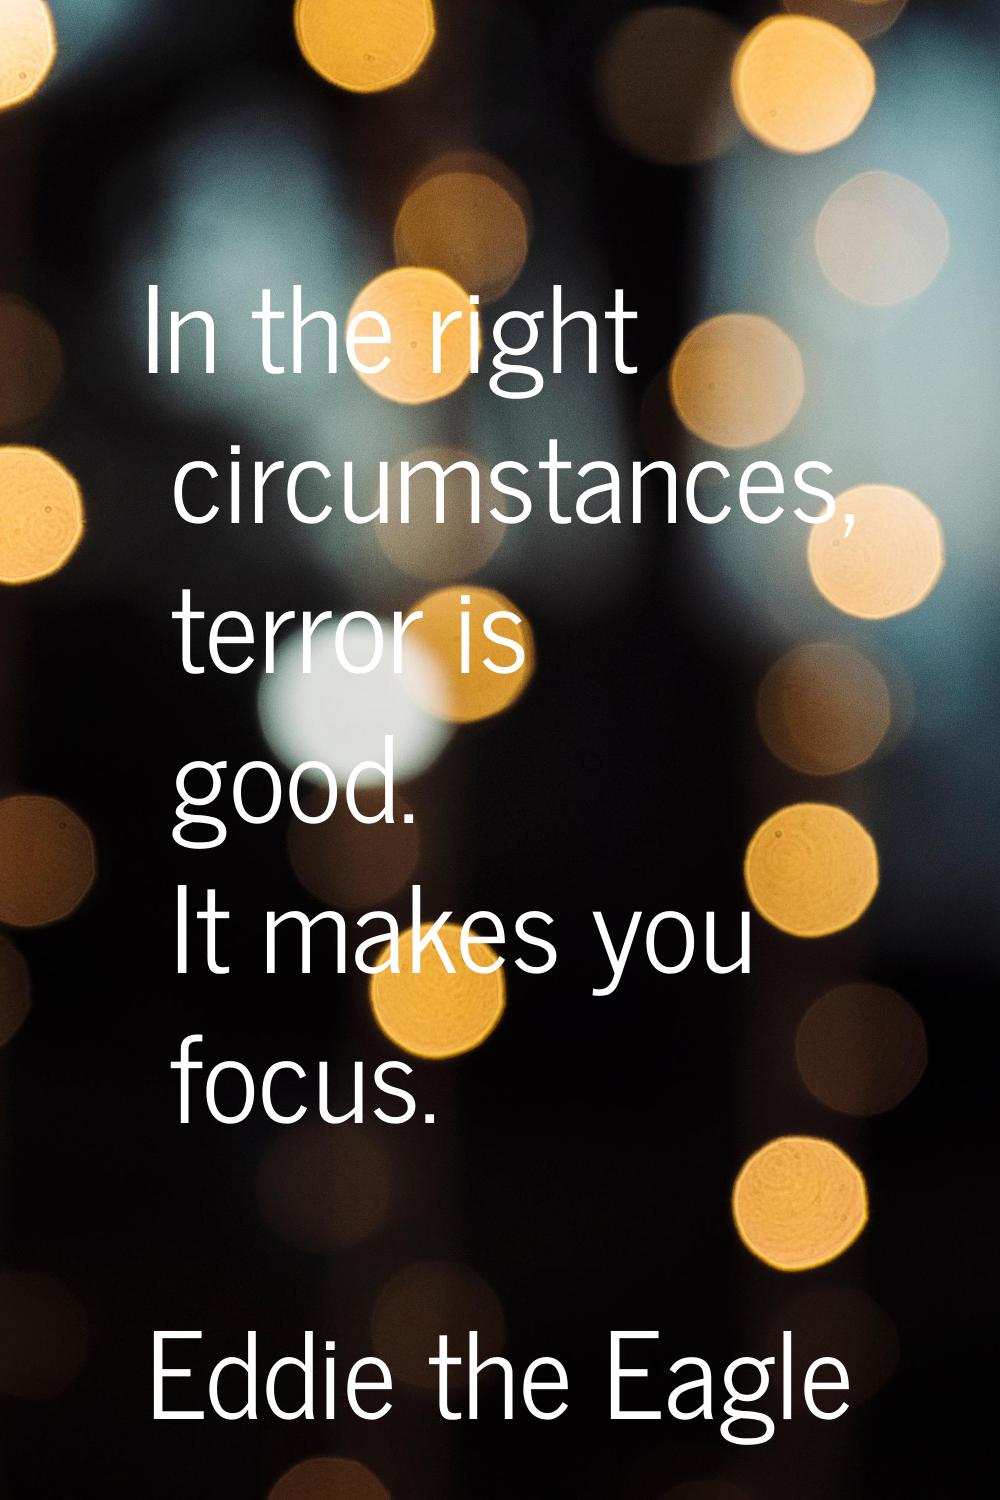 In the right circumstances, terror is good. It makes you focus.